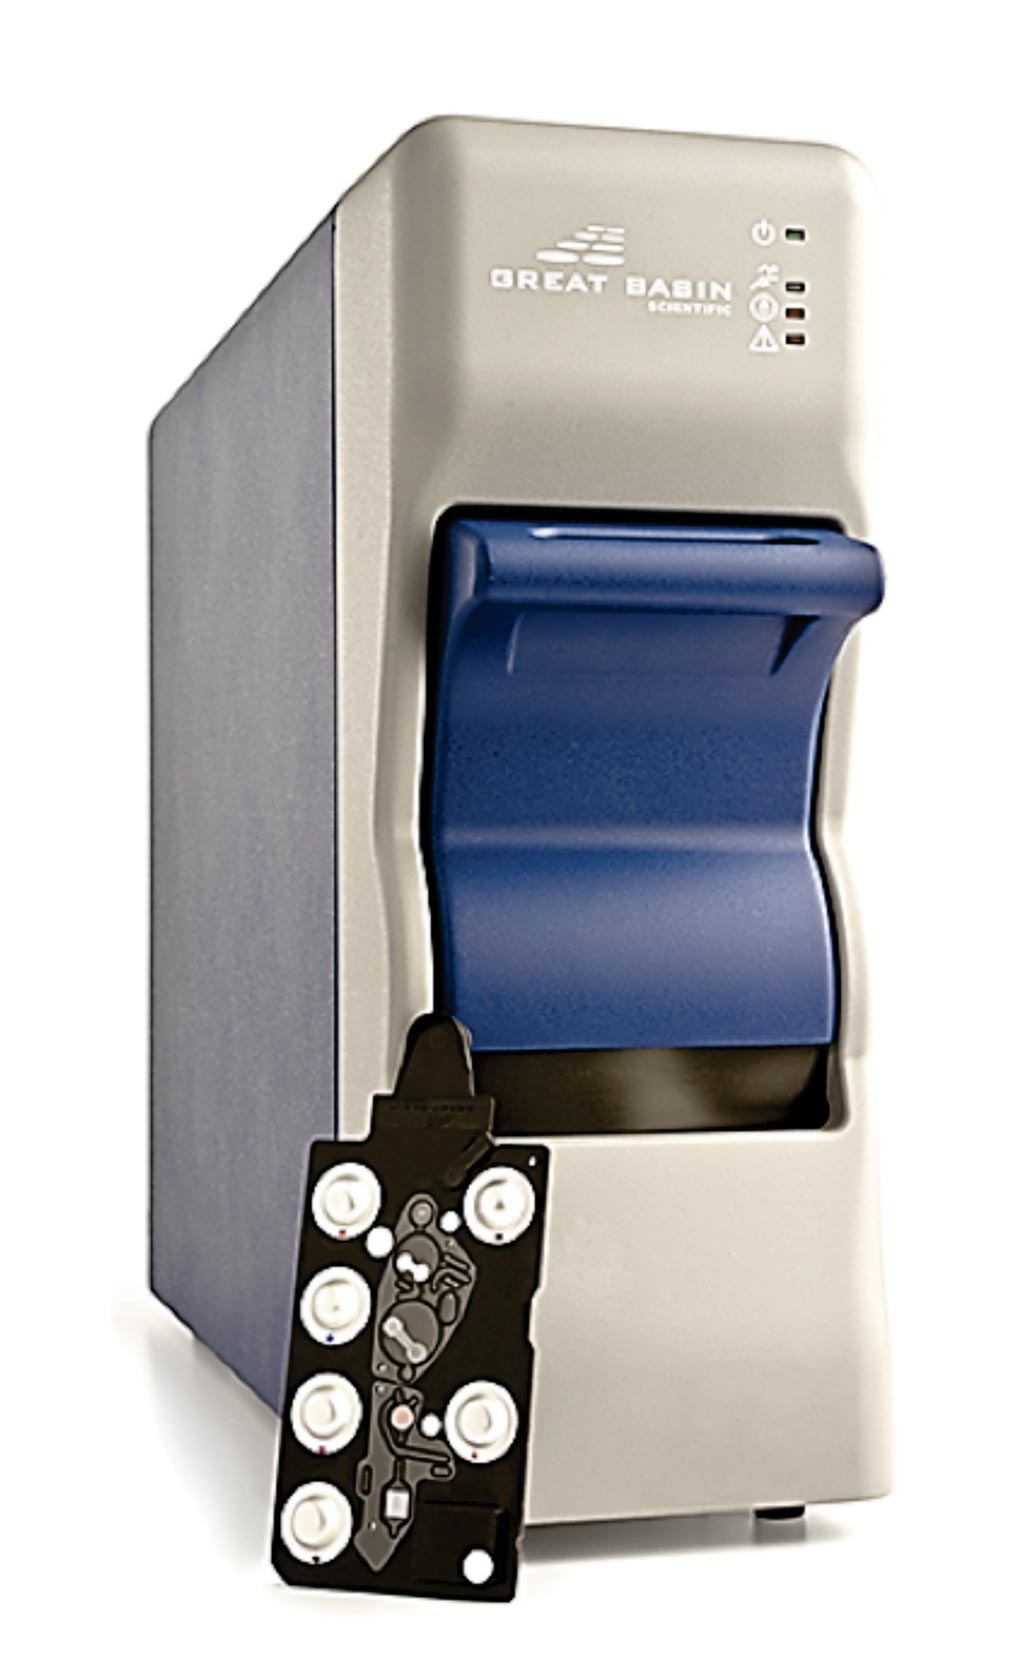 Image: The Great Basin bench top analyzer with assay cartridge (Photo courtesy of Great Basin Scientific).